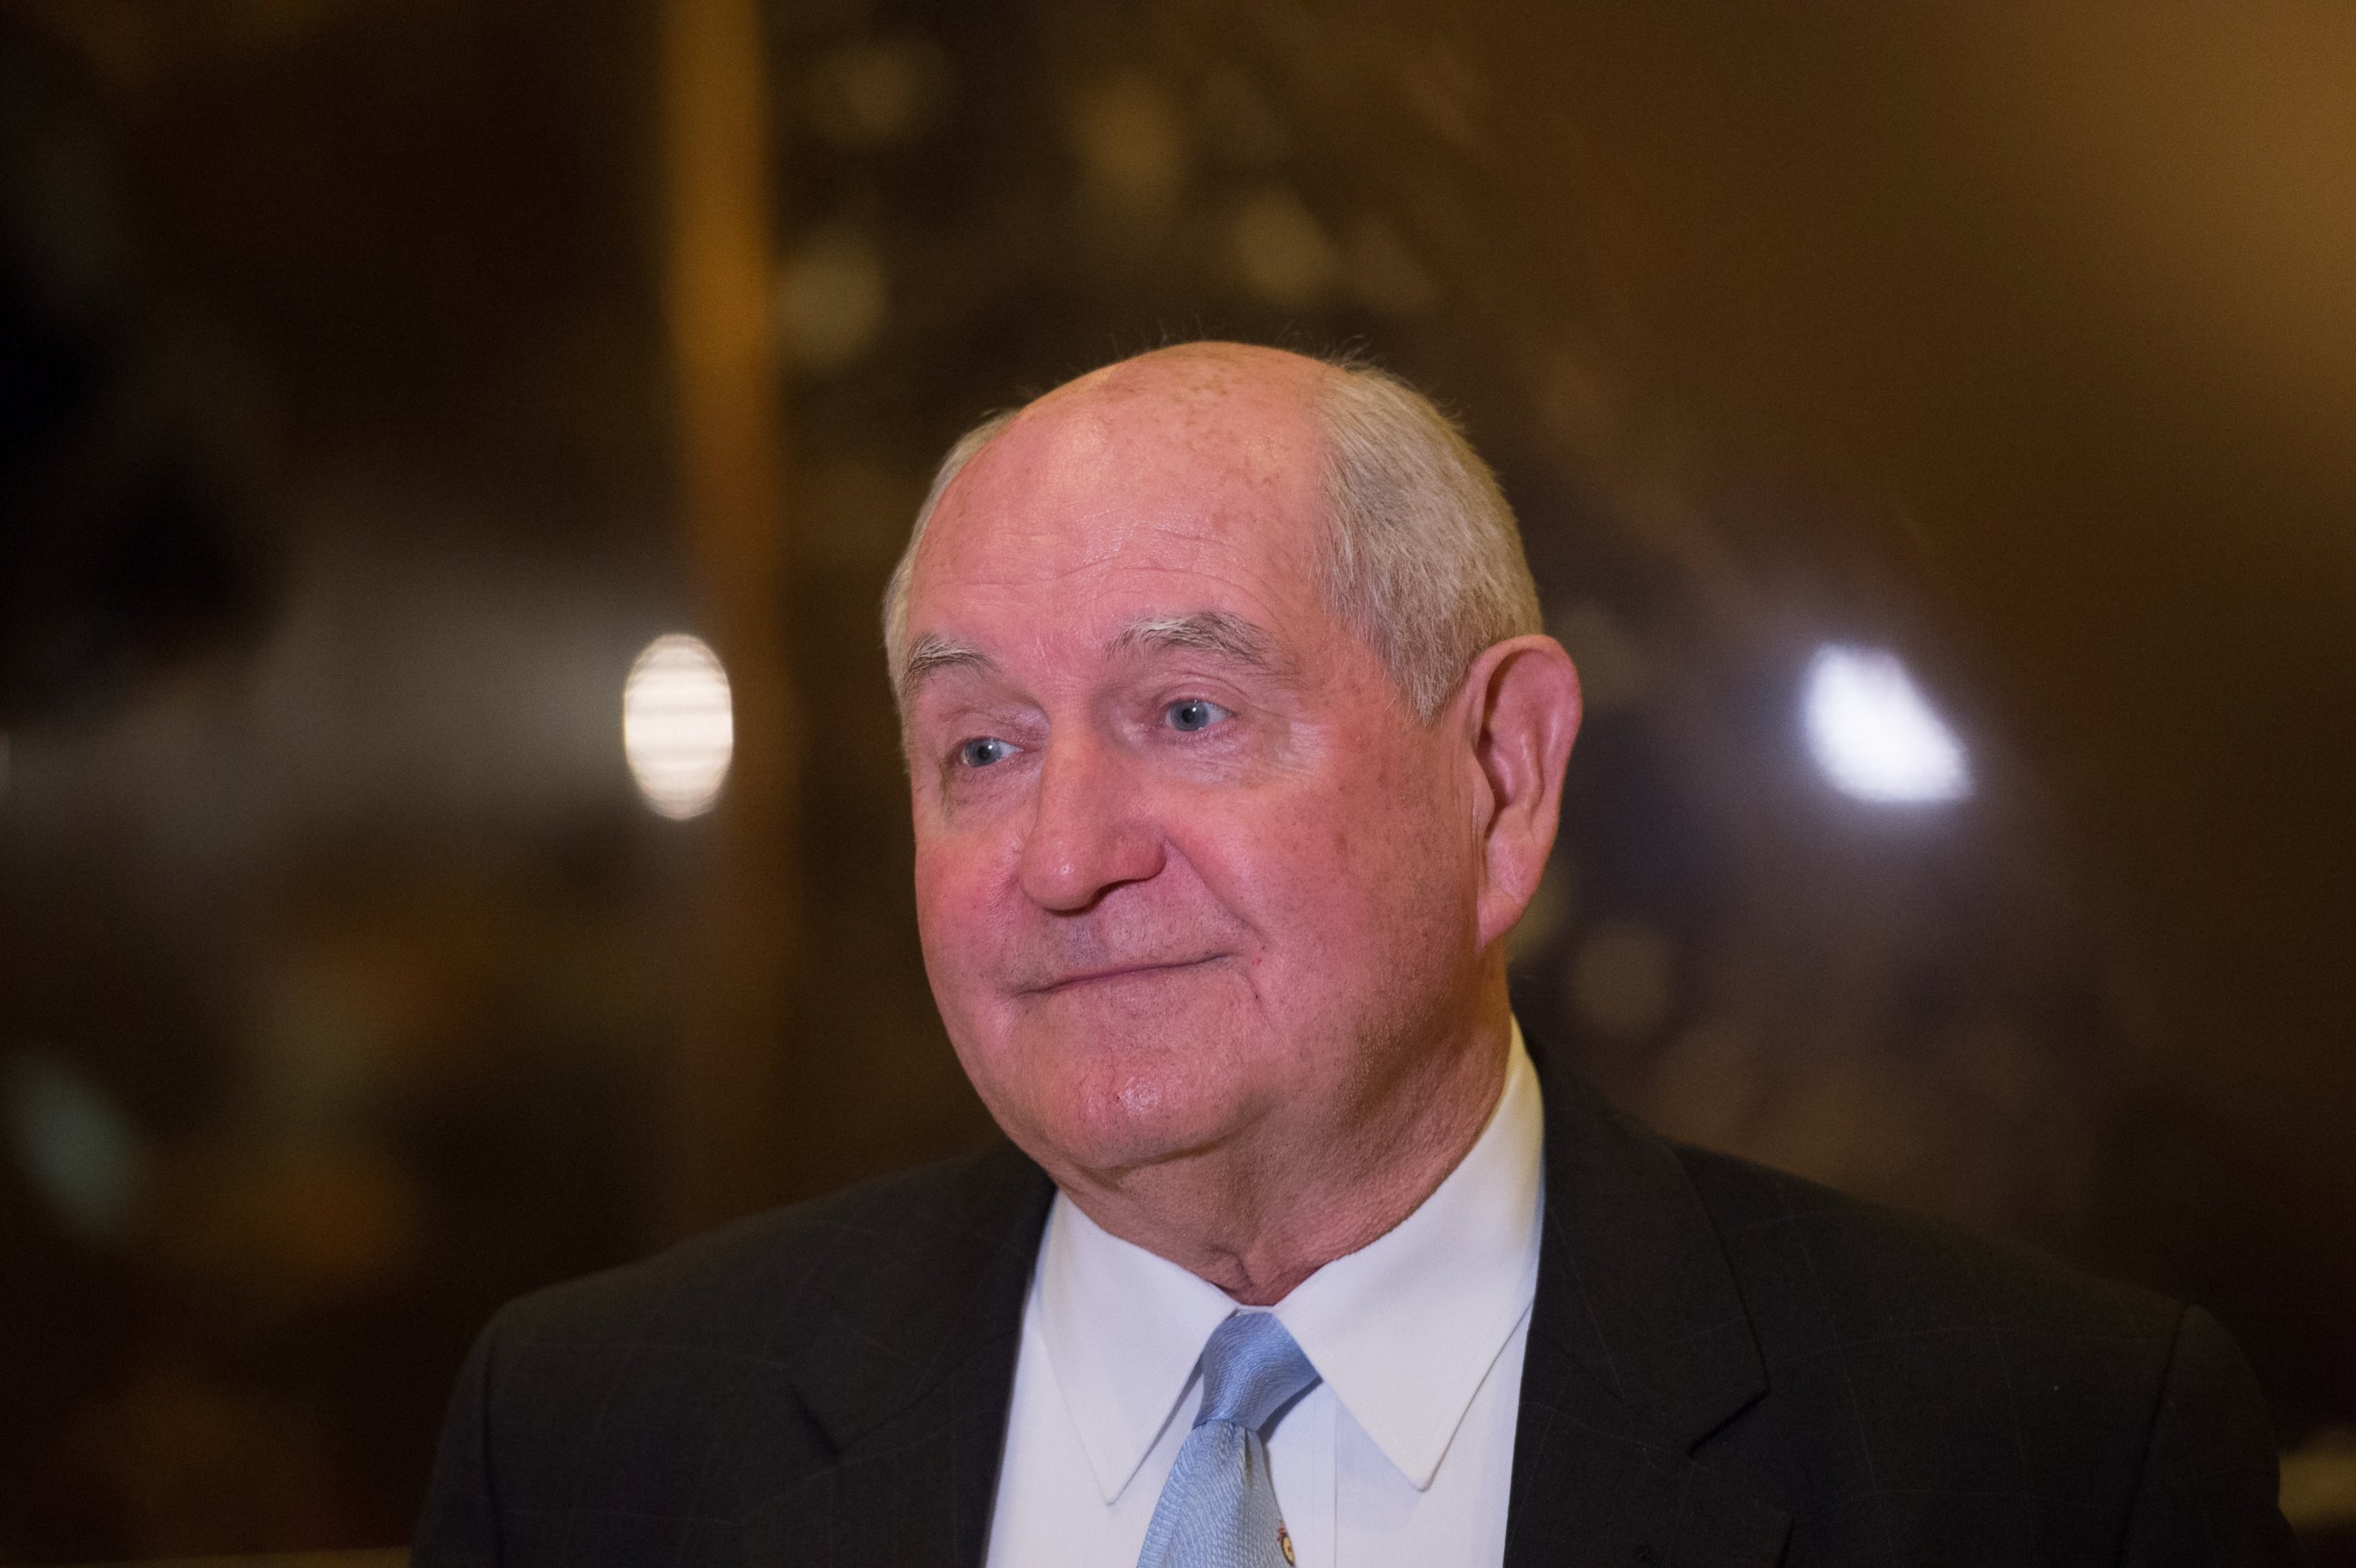 PHOTO: Former Georgia governor Sonny Perdue speaks to the media in the lobby of Trump Tower, Nov. 30, 2016, in New York.